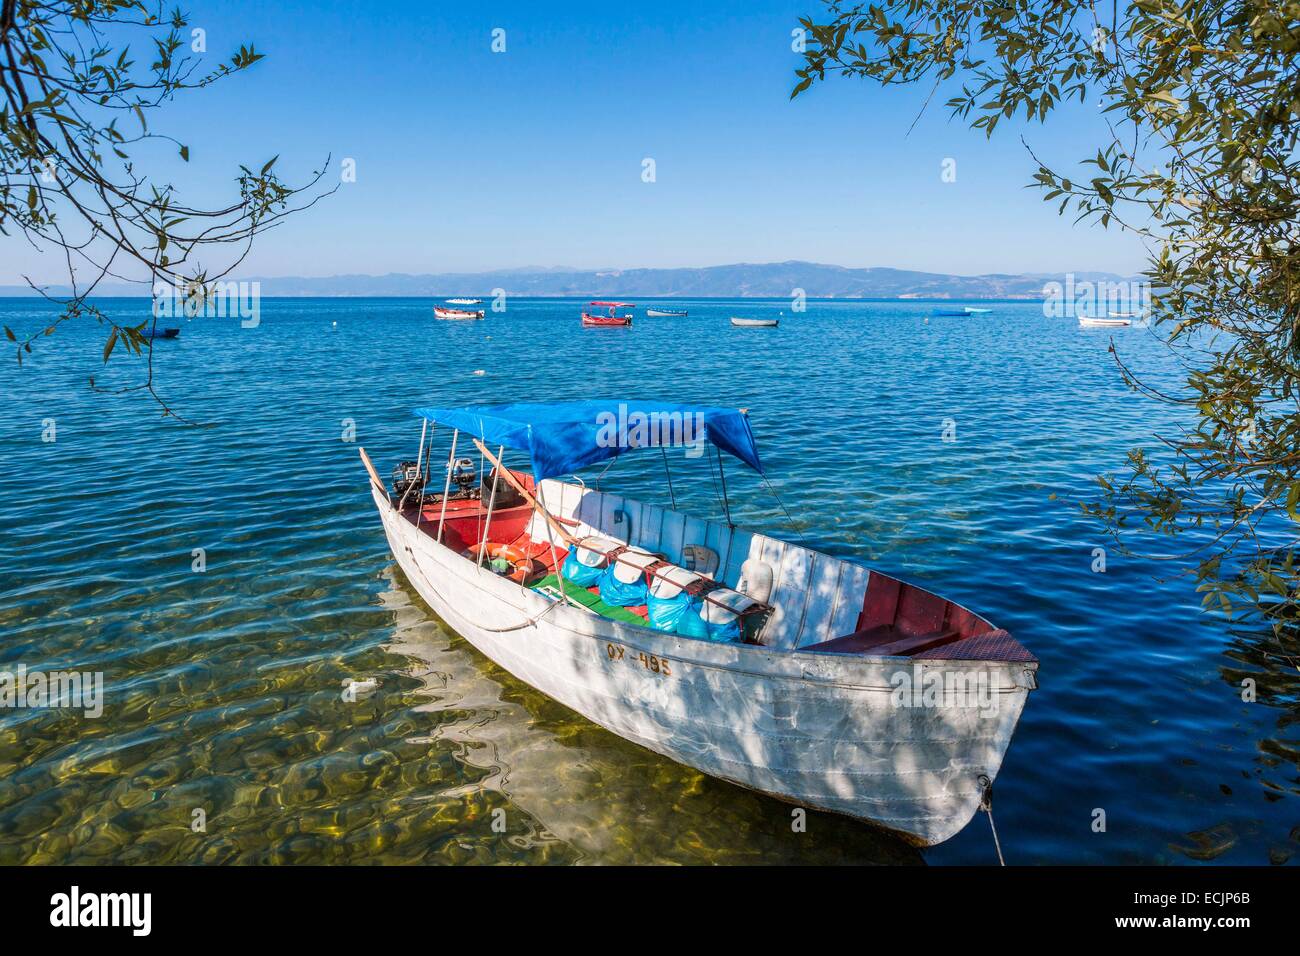 Republic of Macedonia, Lake Ohrid, listed as World Heritage by UNESCO Site, fisherman boat Stock Photo